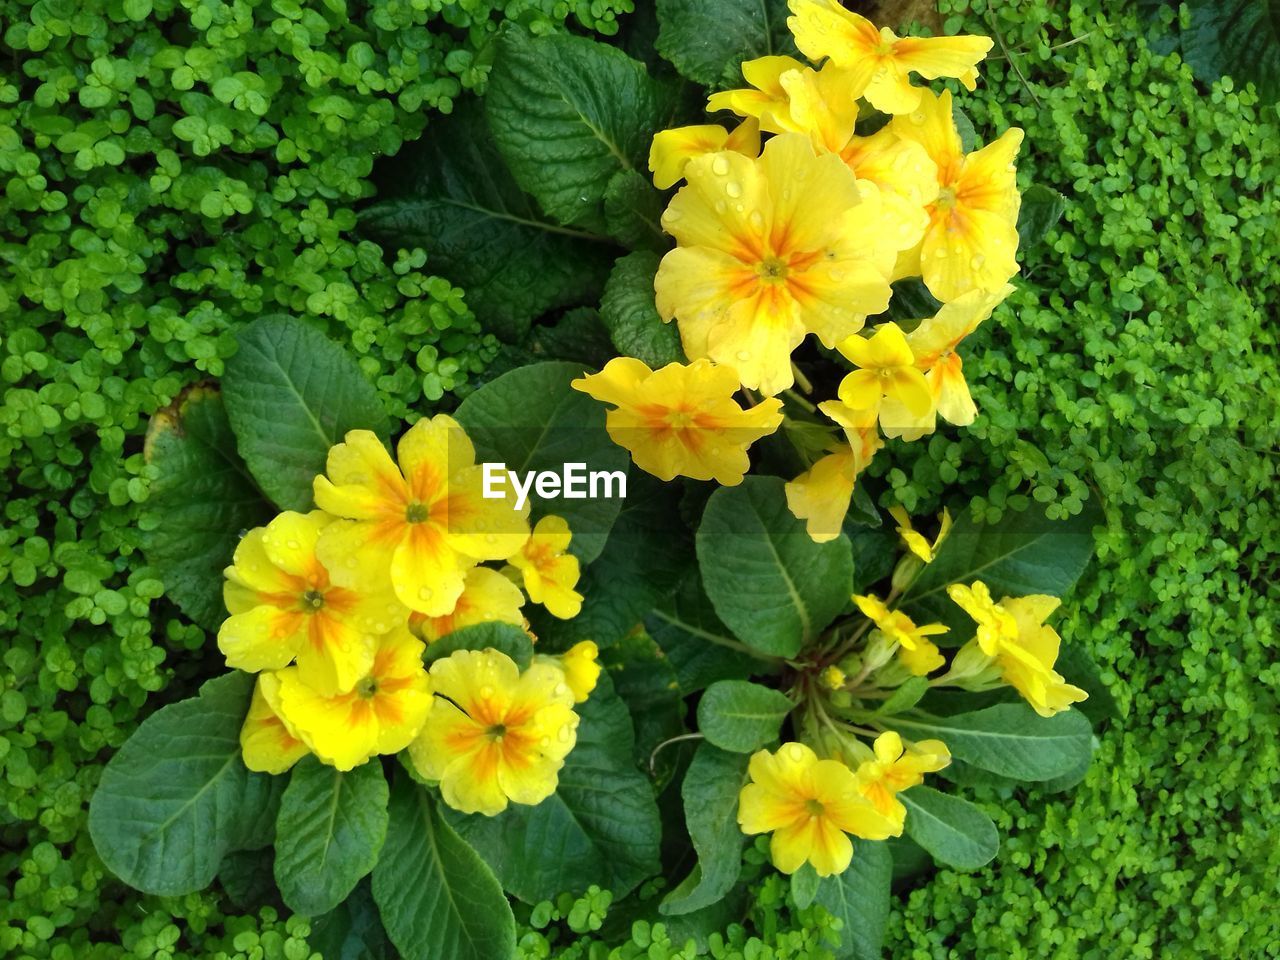 YELLOW FLOWERS BLOOMING OUTDOORS